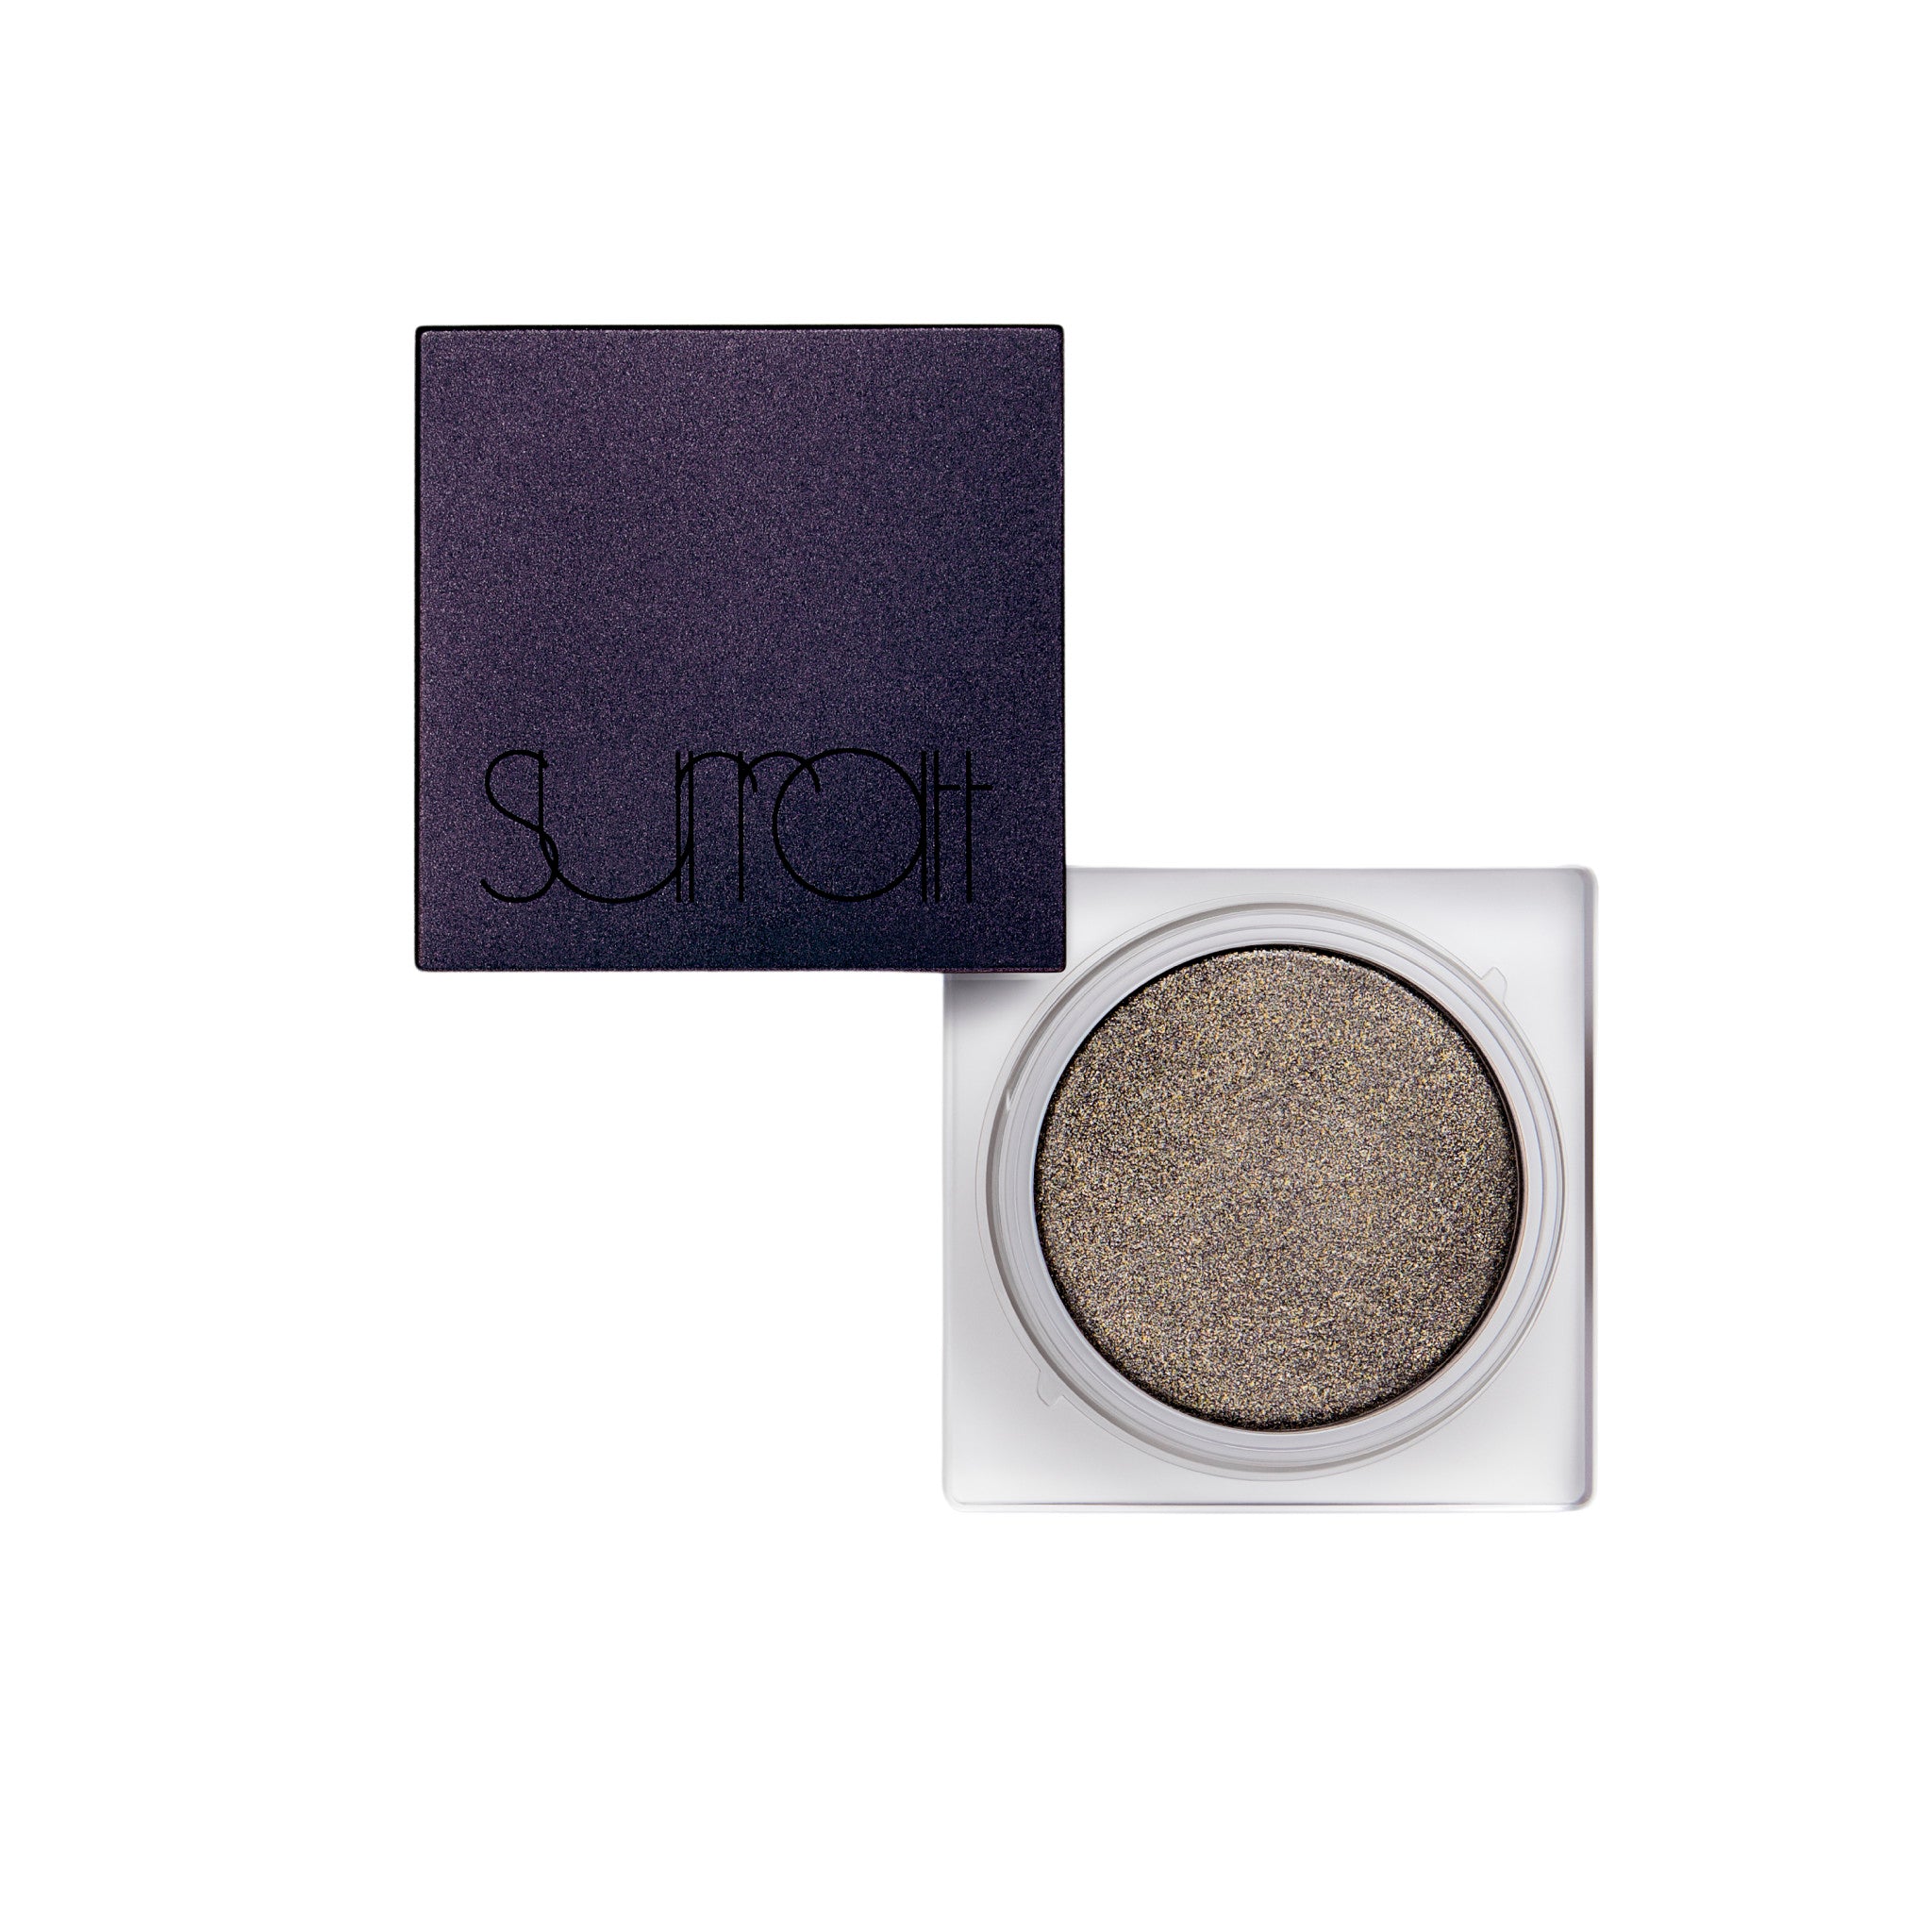 Surratt Souffle Eyeshadow Color/Shade variant: Nuage d'Argent main image. This product is in the color silver